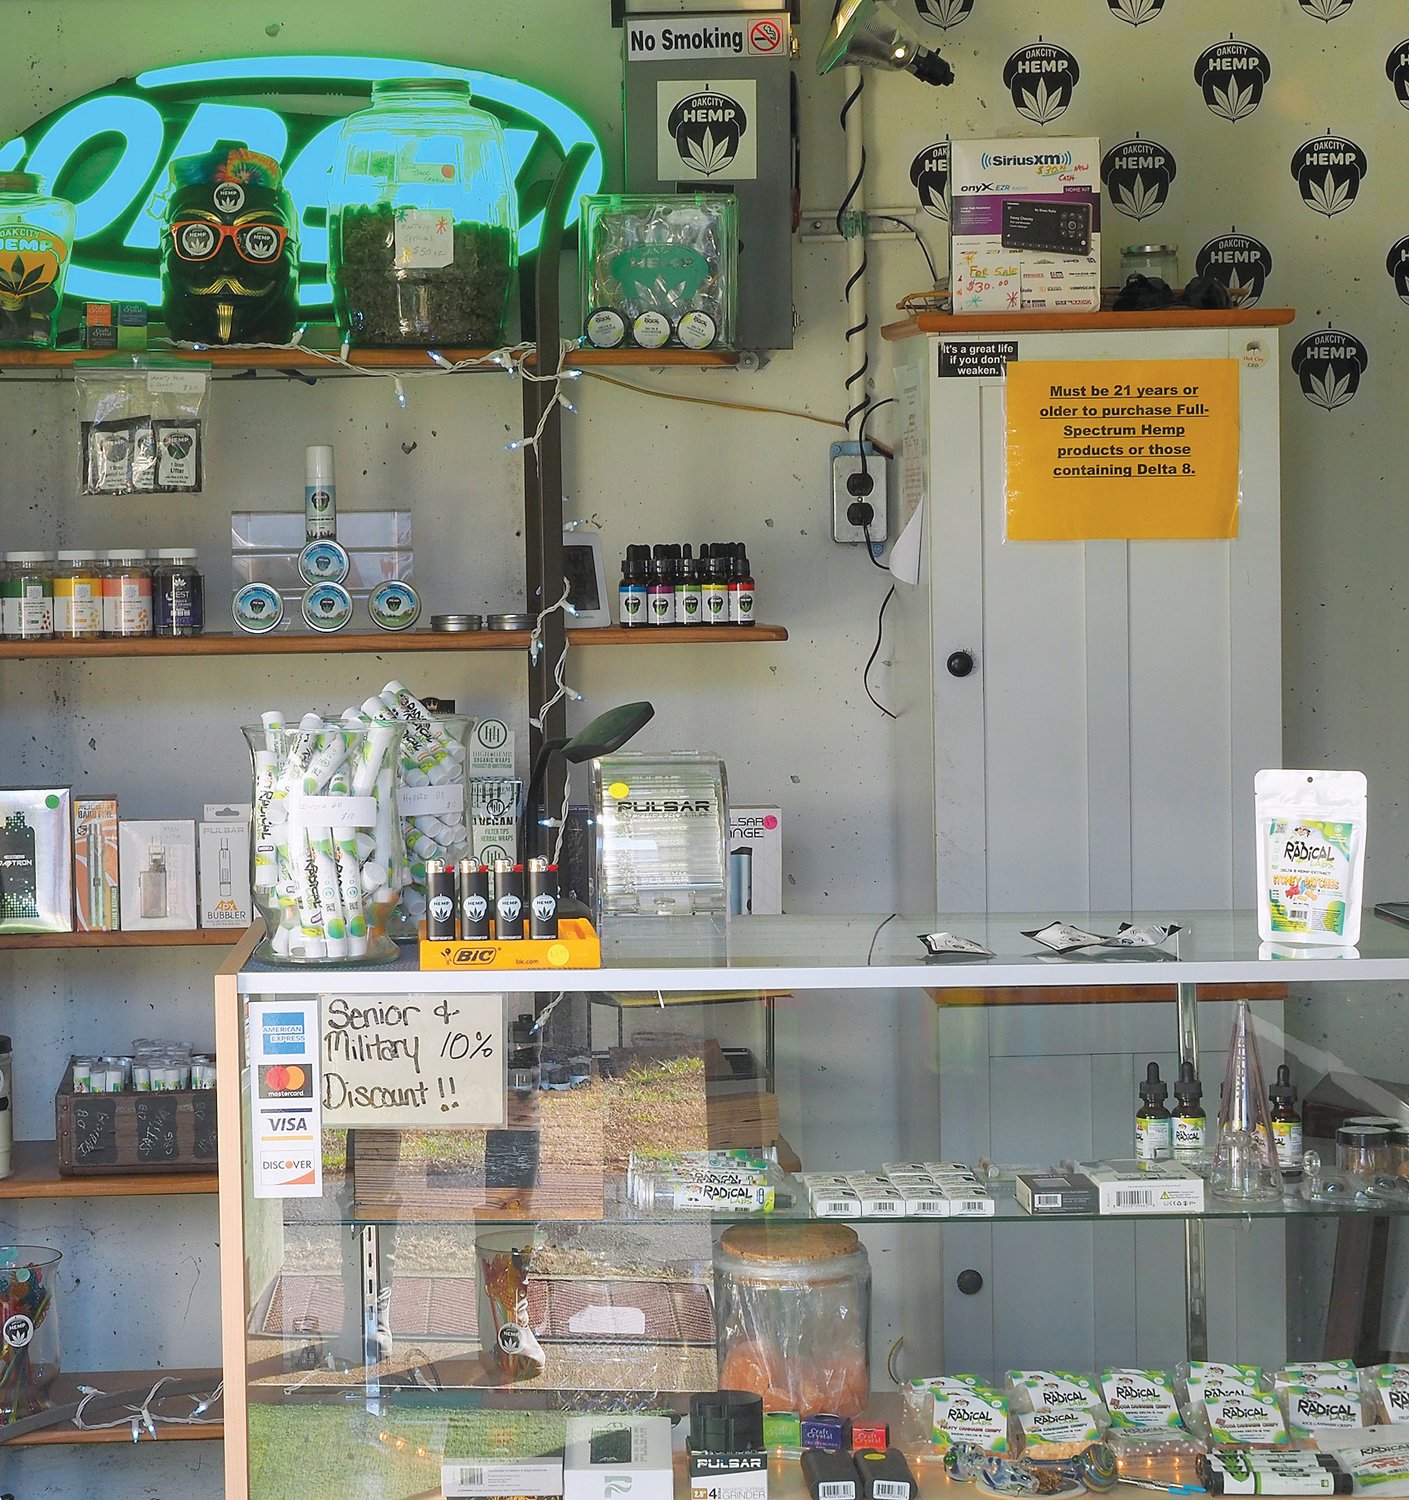 Oak City Hemp in Pittsboro offers various CBD and Delta-8 products for customers. Under a proposed new bill, Oak City may be a candidate to retail medical marijuana.